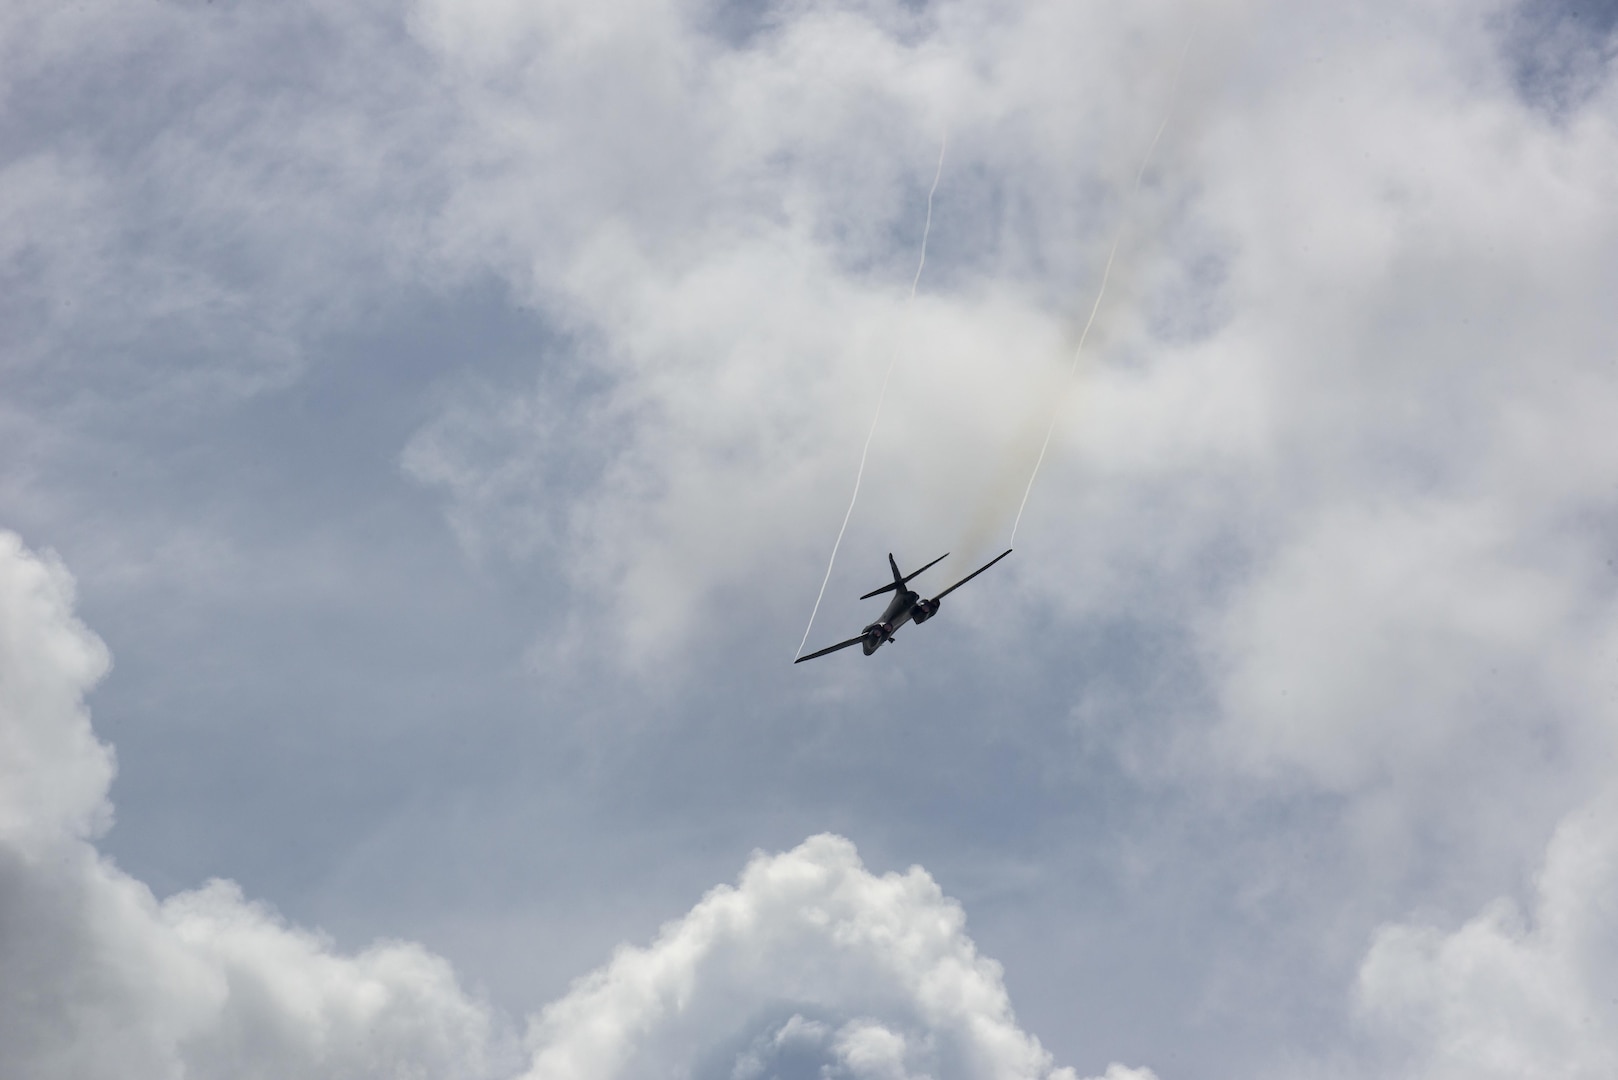 A B1-B Lancer assigned to the 9th Expeditionary Bomb Squadron flies over the 73rd Guam Liberation Day parade July 21, 2017, in Hagåtña, Guam. The parade commemorated 73 years since U.S. armed forces liberated the island from Japanese occupation. During World War II, Japan seized Guam on December 10, 1941, and on July 21, 1944, the U.S. armed forces liberated the island. (U.S. Air Force photo by Airman 1st Class Christopher Quail)